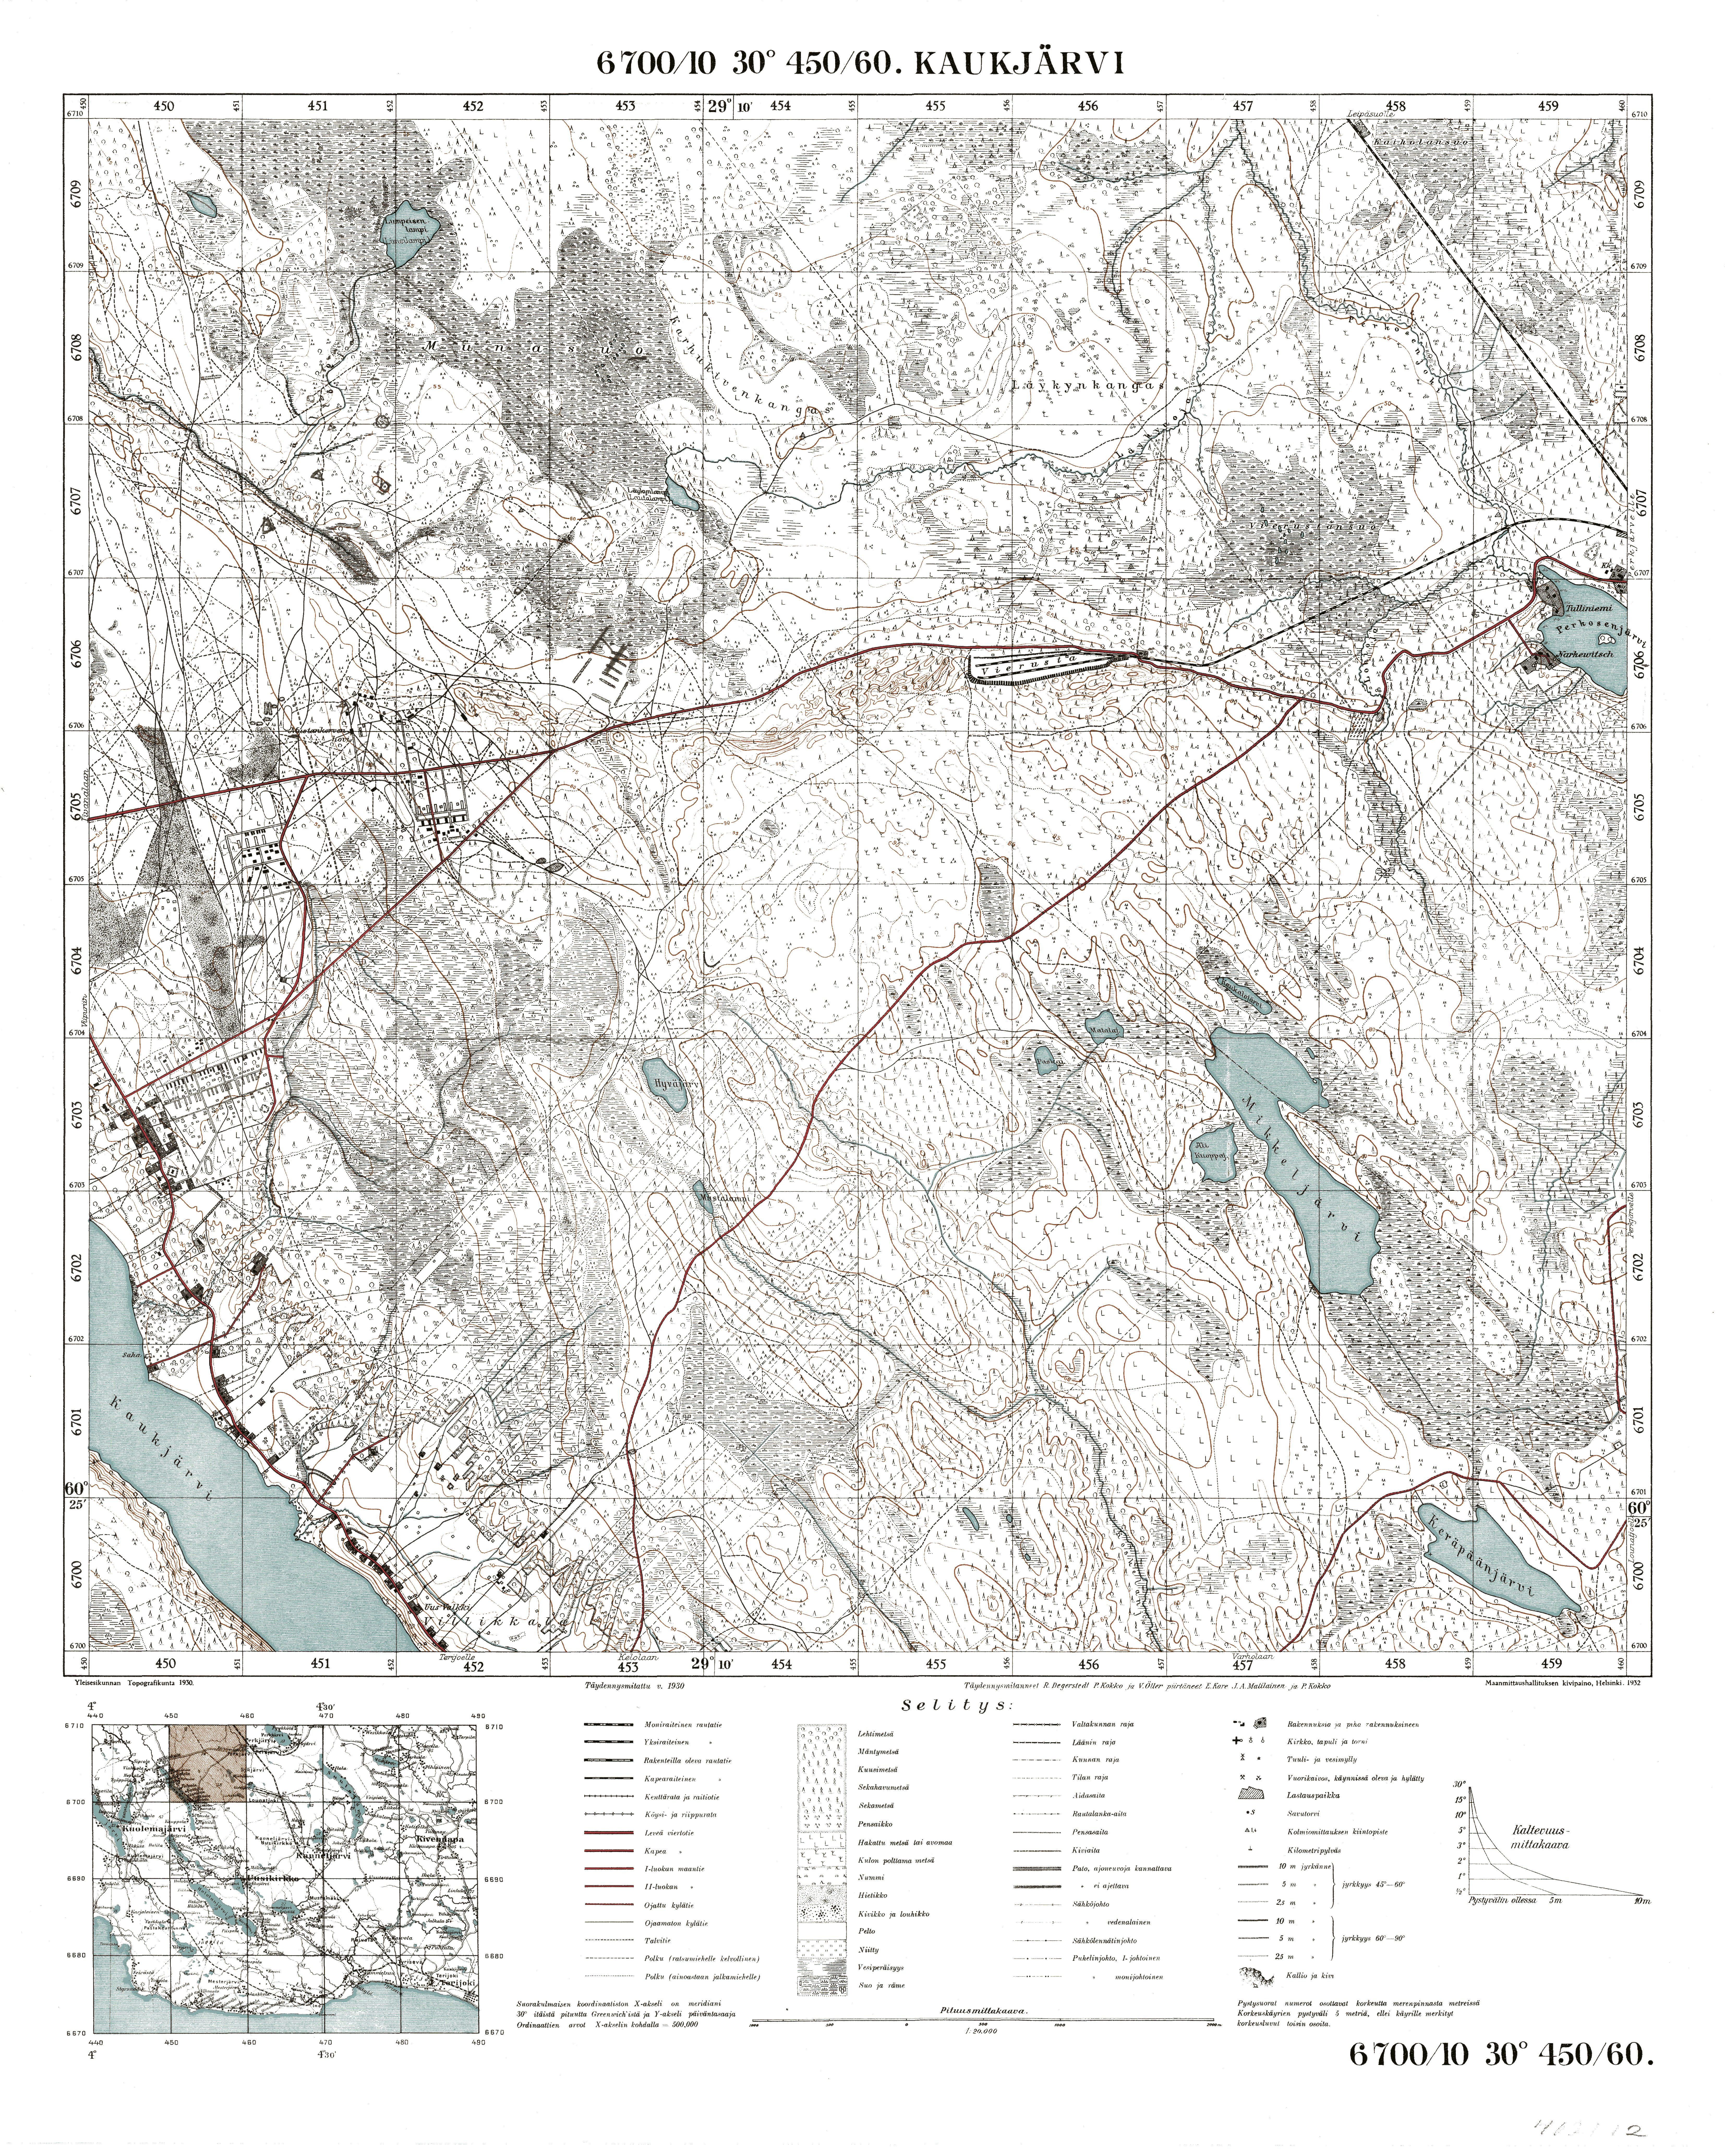 Krasavitsa Lake. Kaukjärvi. Topografikartta 402112. Topographic map from 1930. Use the zooming tool to explore in higher level of detail. Obtain as a quality print or high resolution image